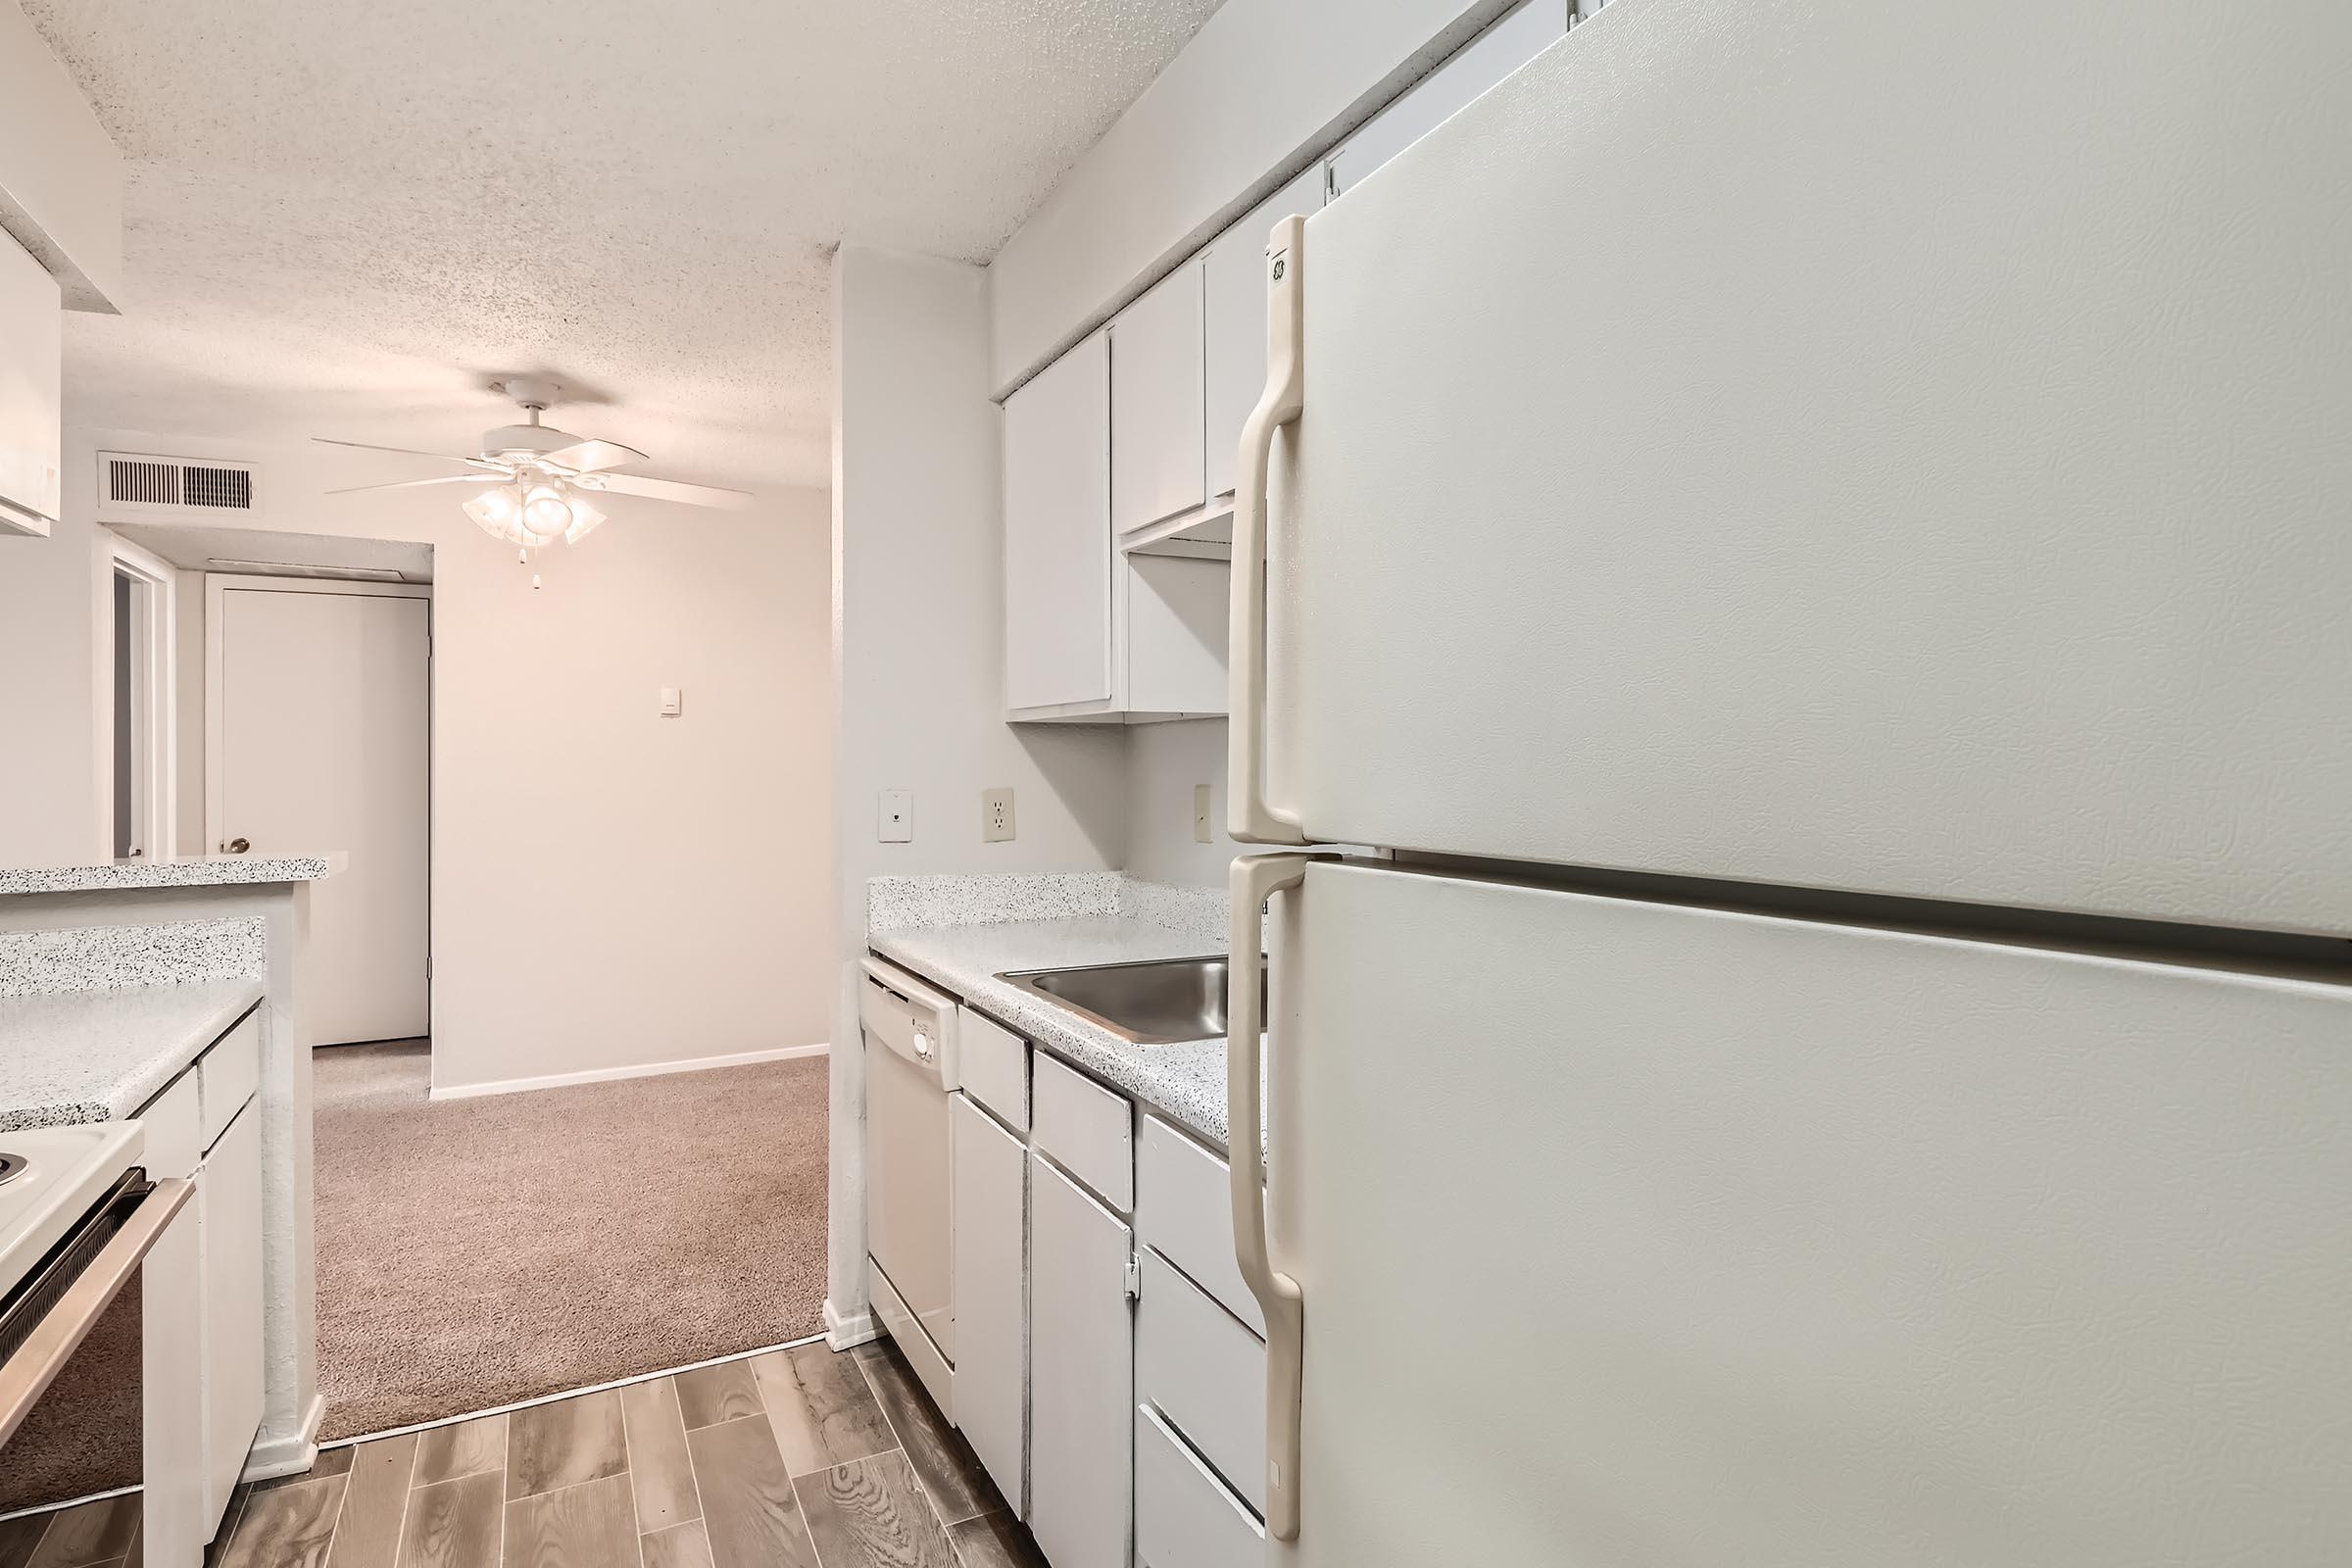 An apartment kitchen at Rise North Arlington with white cabinets near the carpeted dining area.